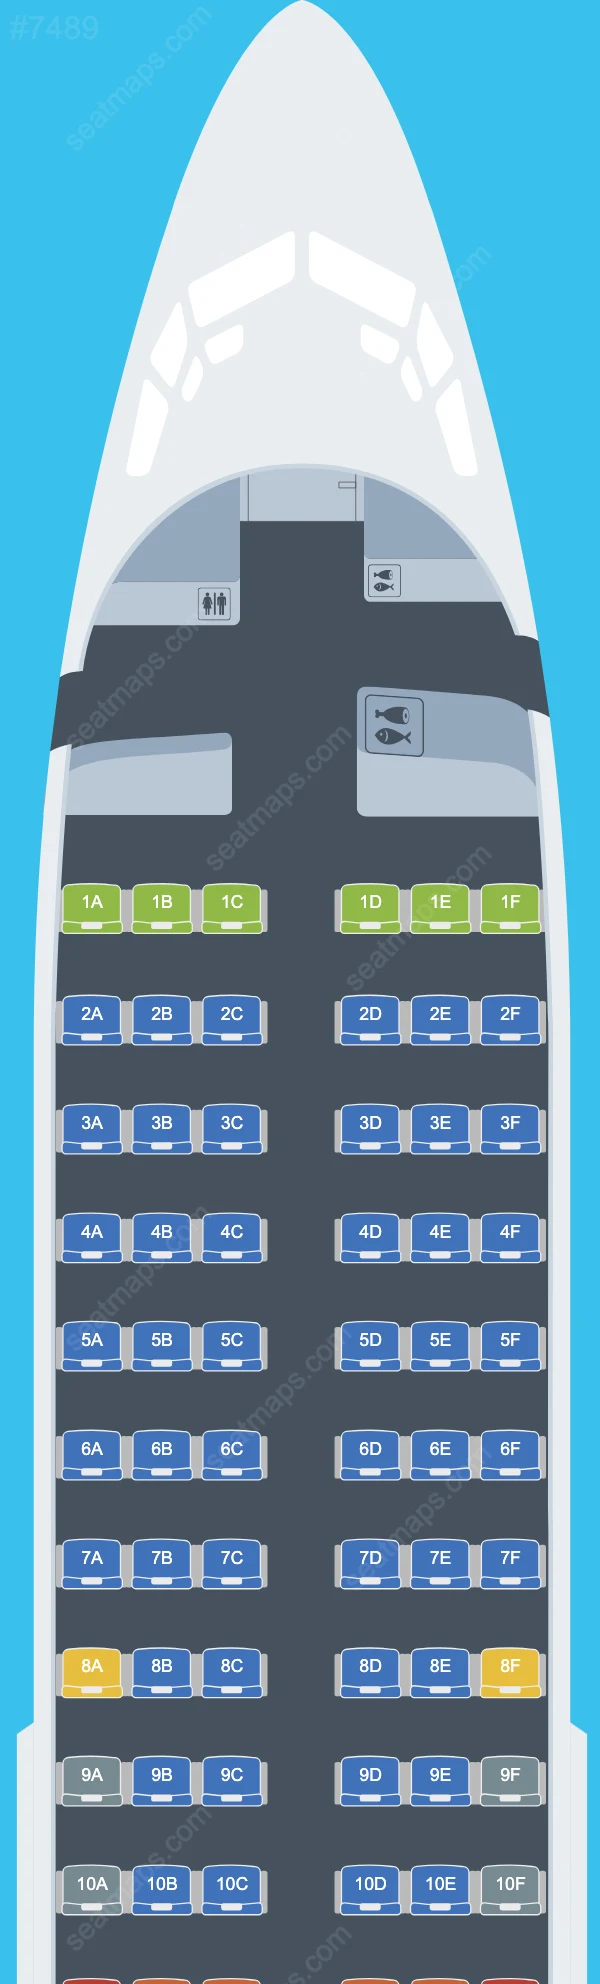 Kunming Airlines Boeing 737 Seat Maps 737-700